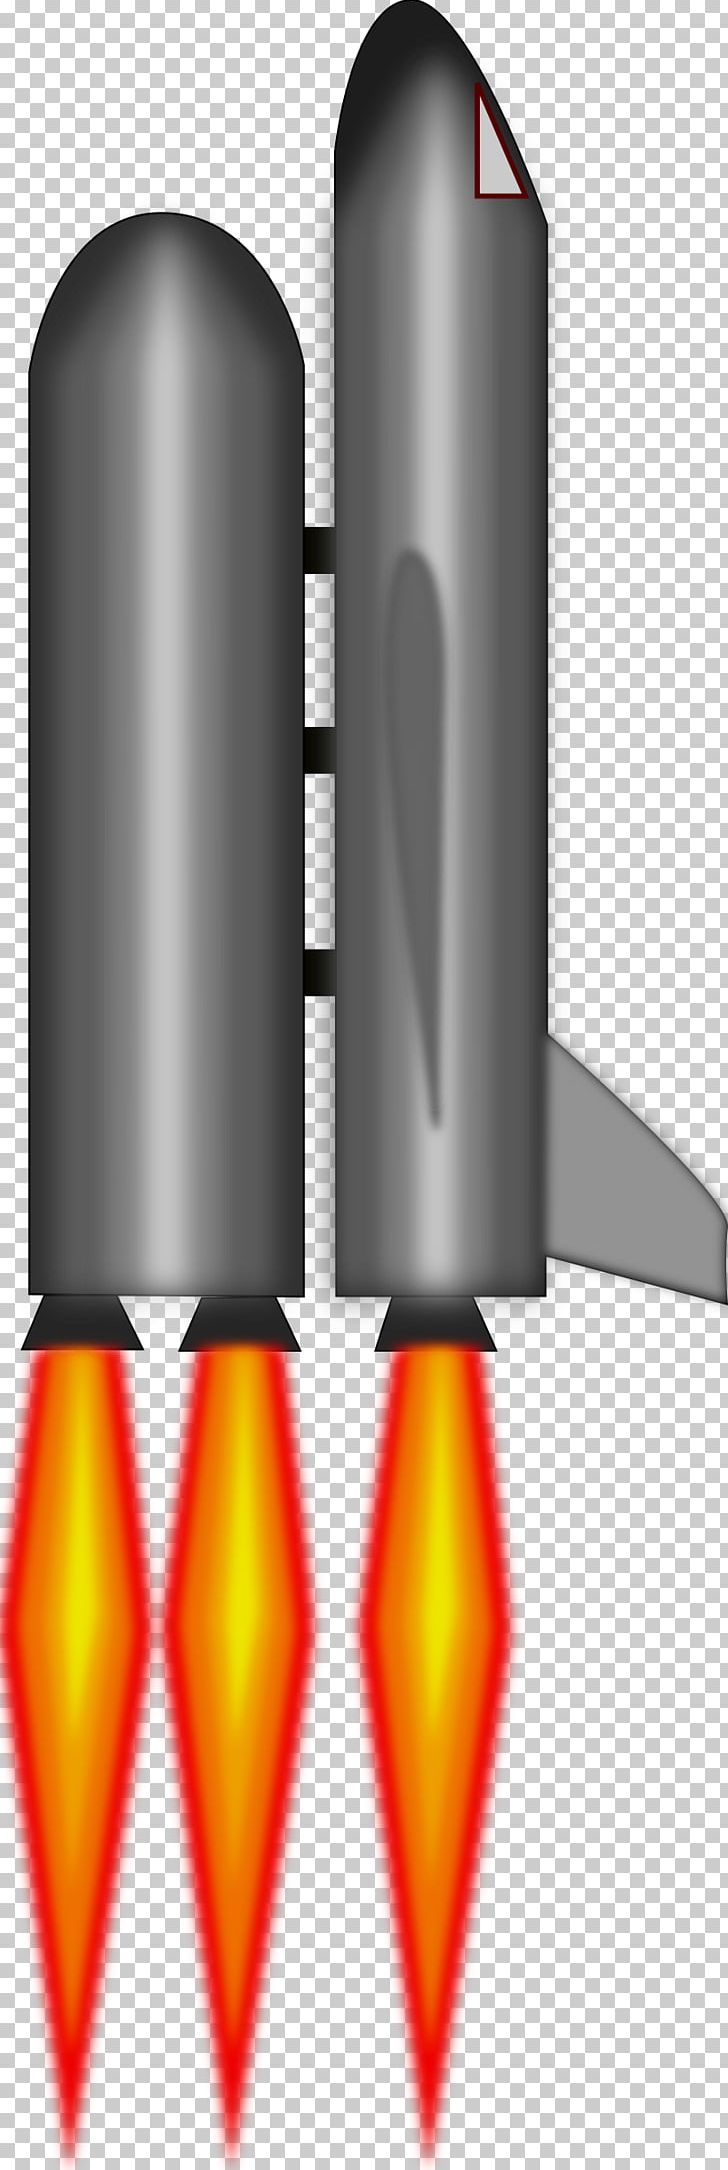 Apollo Program Spacecraft Space Shuttle PNG, Clipart, Apollo, Apollo Program, Computer Icons, Cylinder, Outer Space Free PNG Download